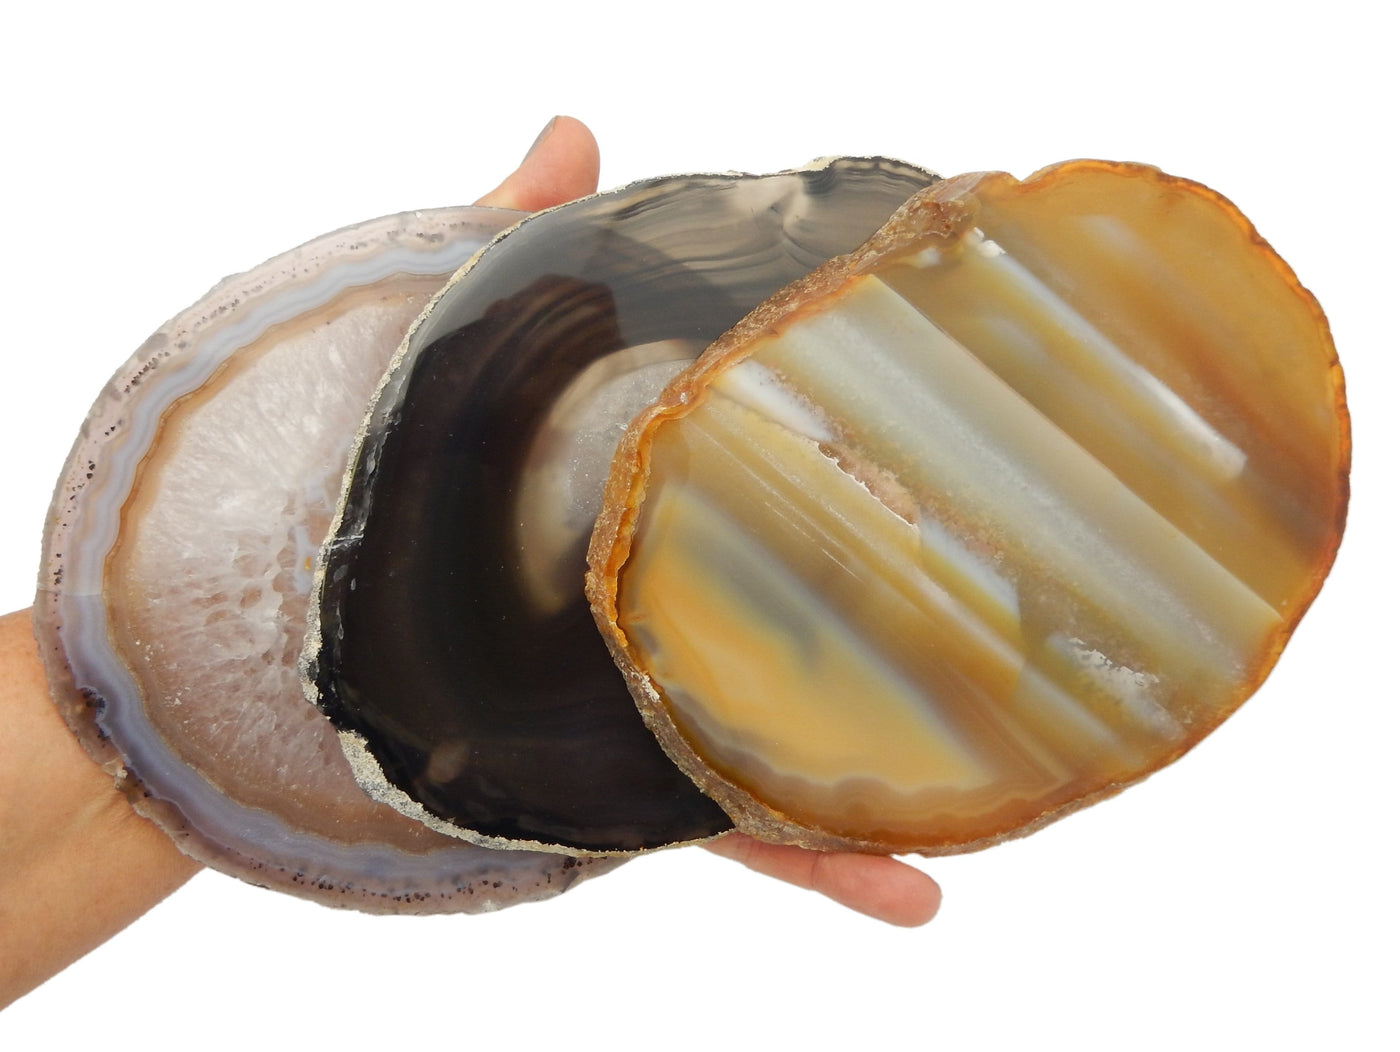 Natural Agate Slice - Agate Slices #7 3 almost covering a hand